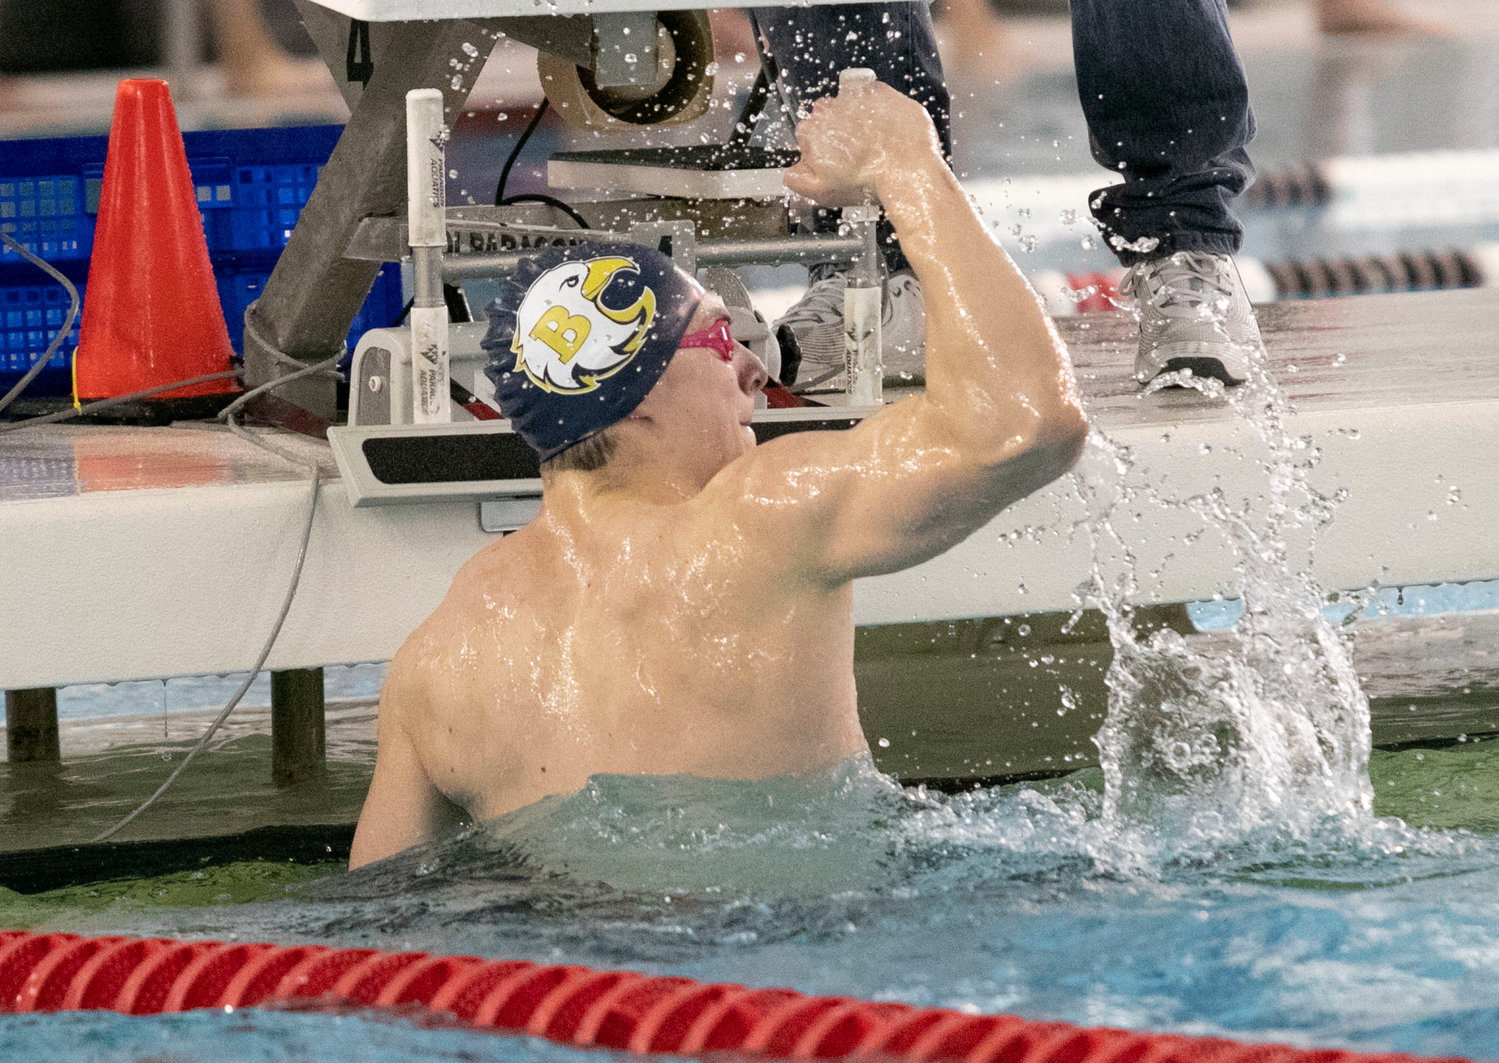 Barrington High School’s William McClelland pumps his fist in the air at last year’s state meet. McClelland, who recently committed to swim at Dartmouth College next year, set a state record in 50-freestyle last year.